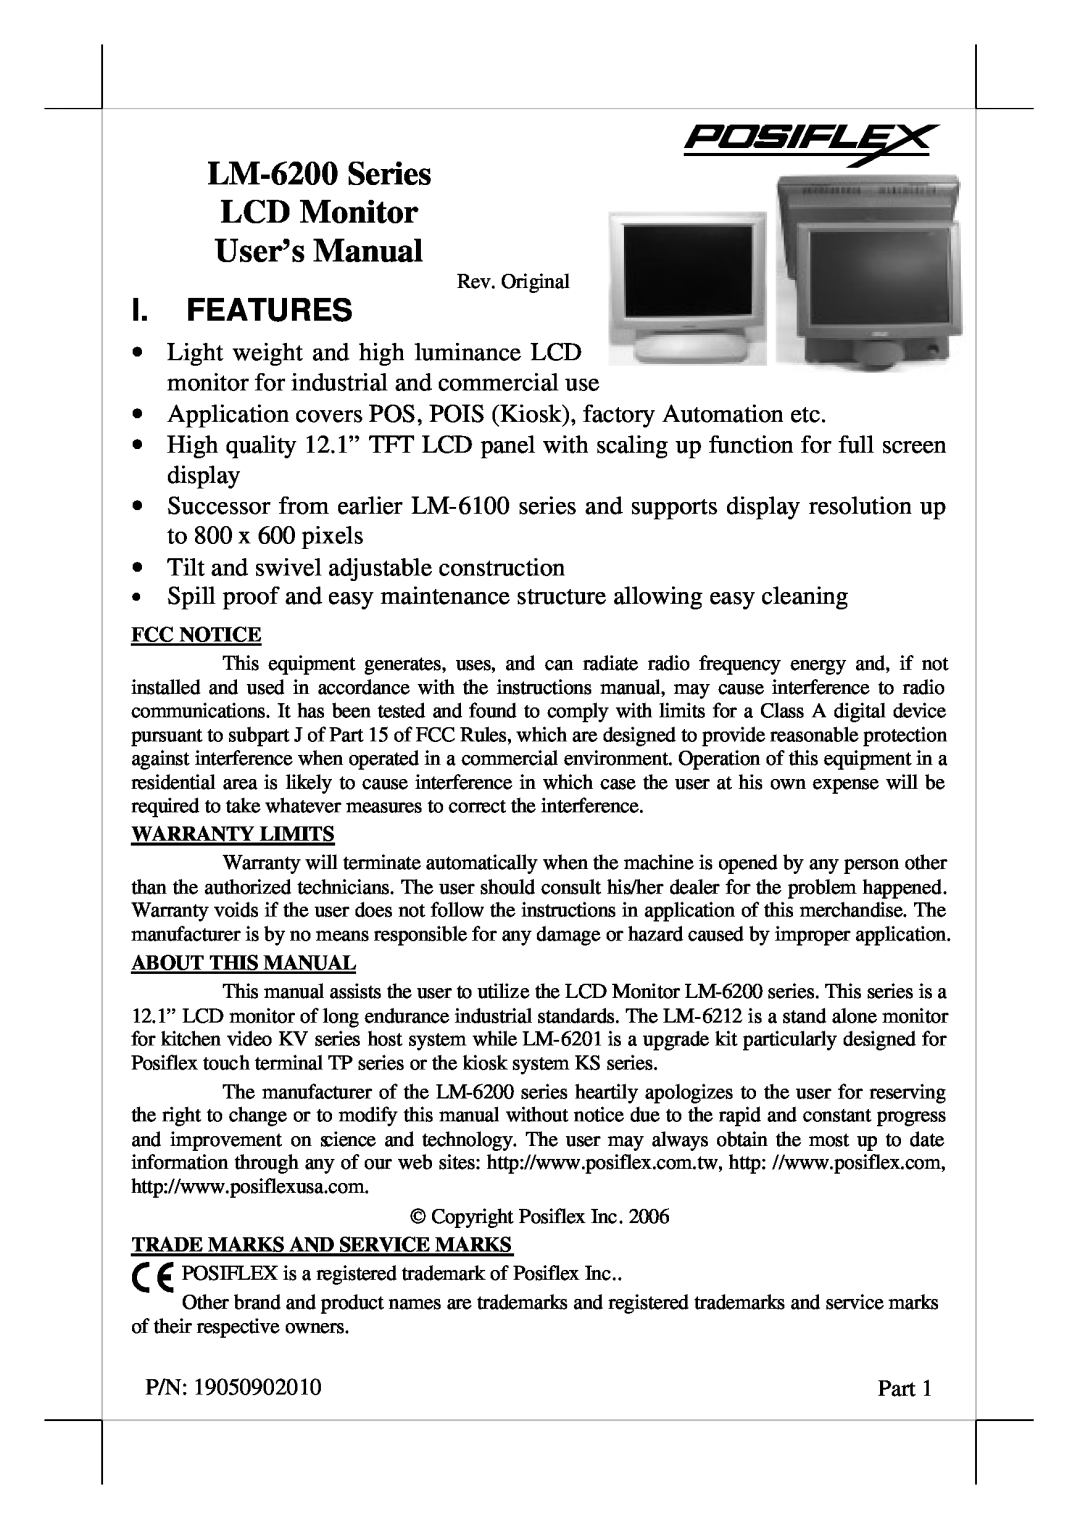 POSIFLEX Business Machines user manual I. Features, LM-6200 Series LCD Monitor User’s Manual, Rev. Original, Fcc Notice 